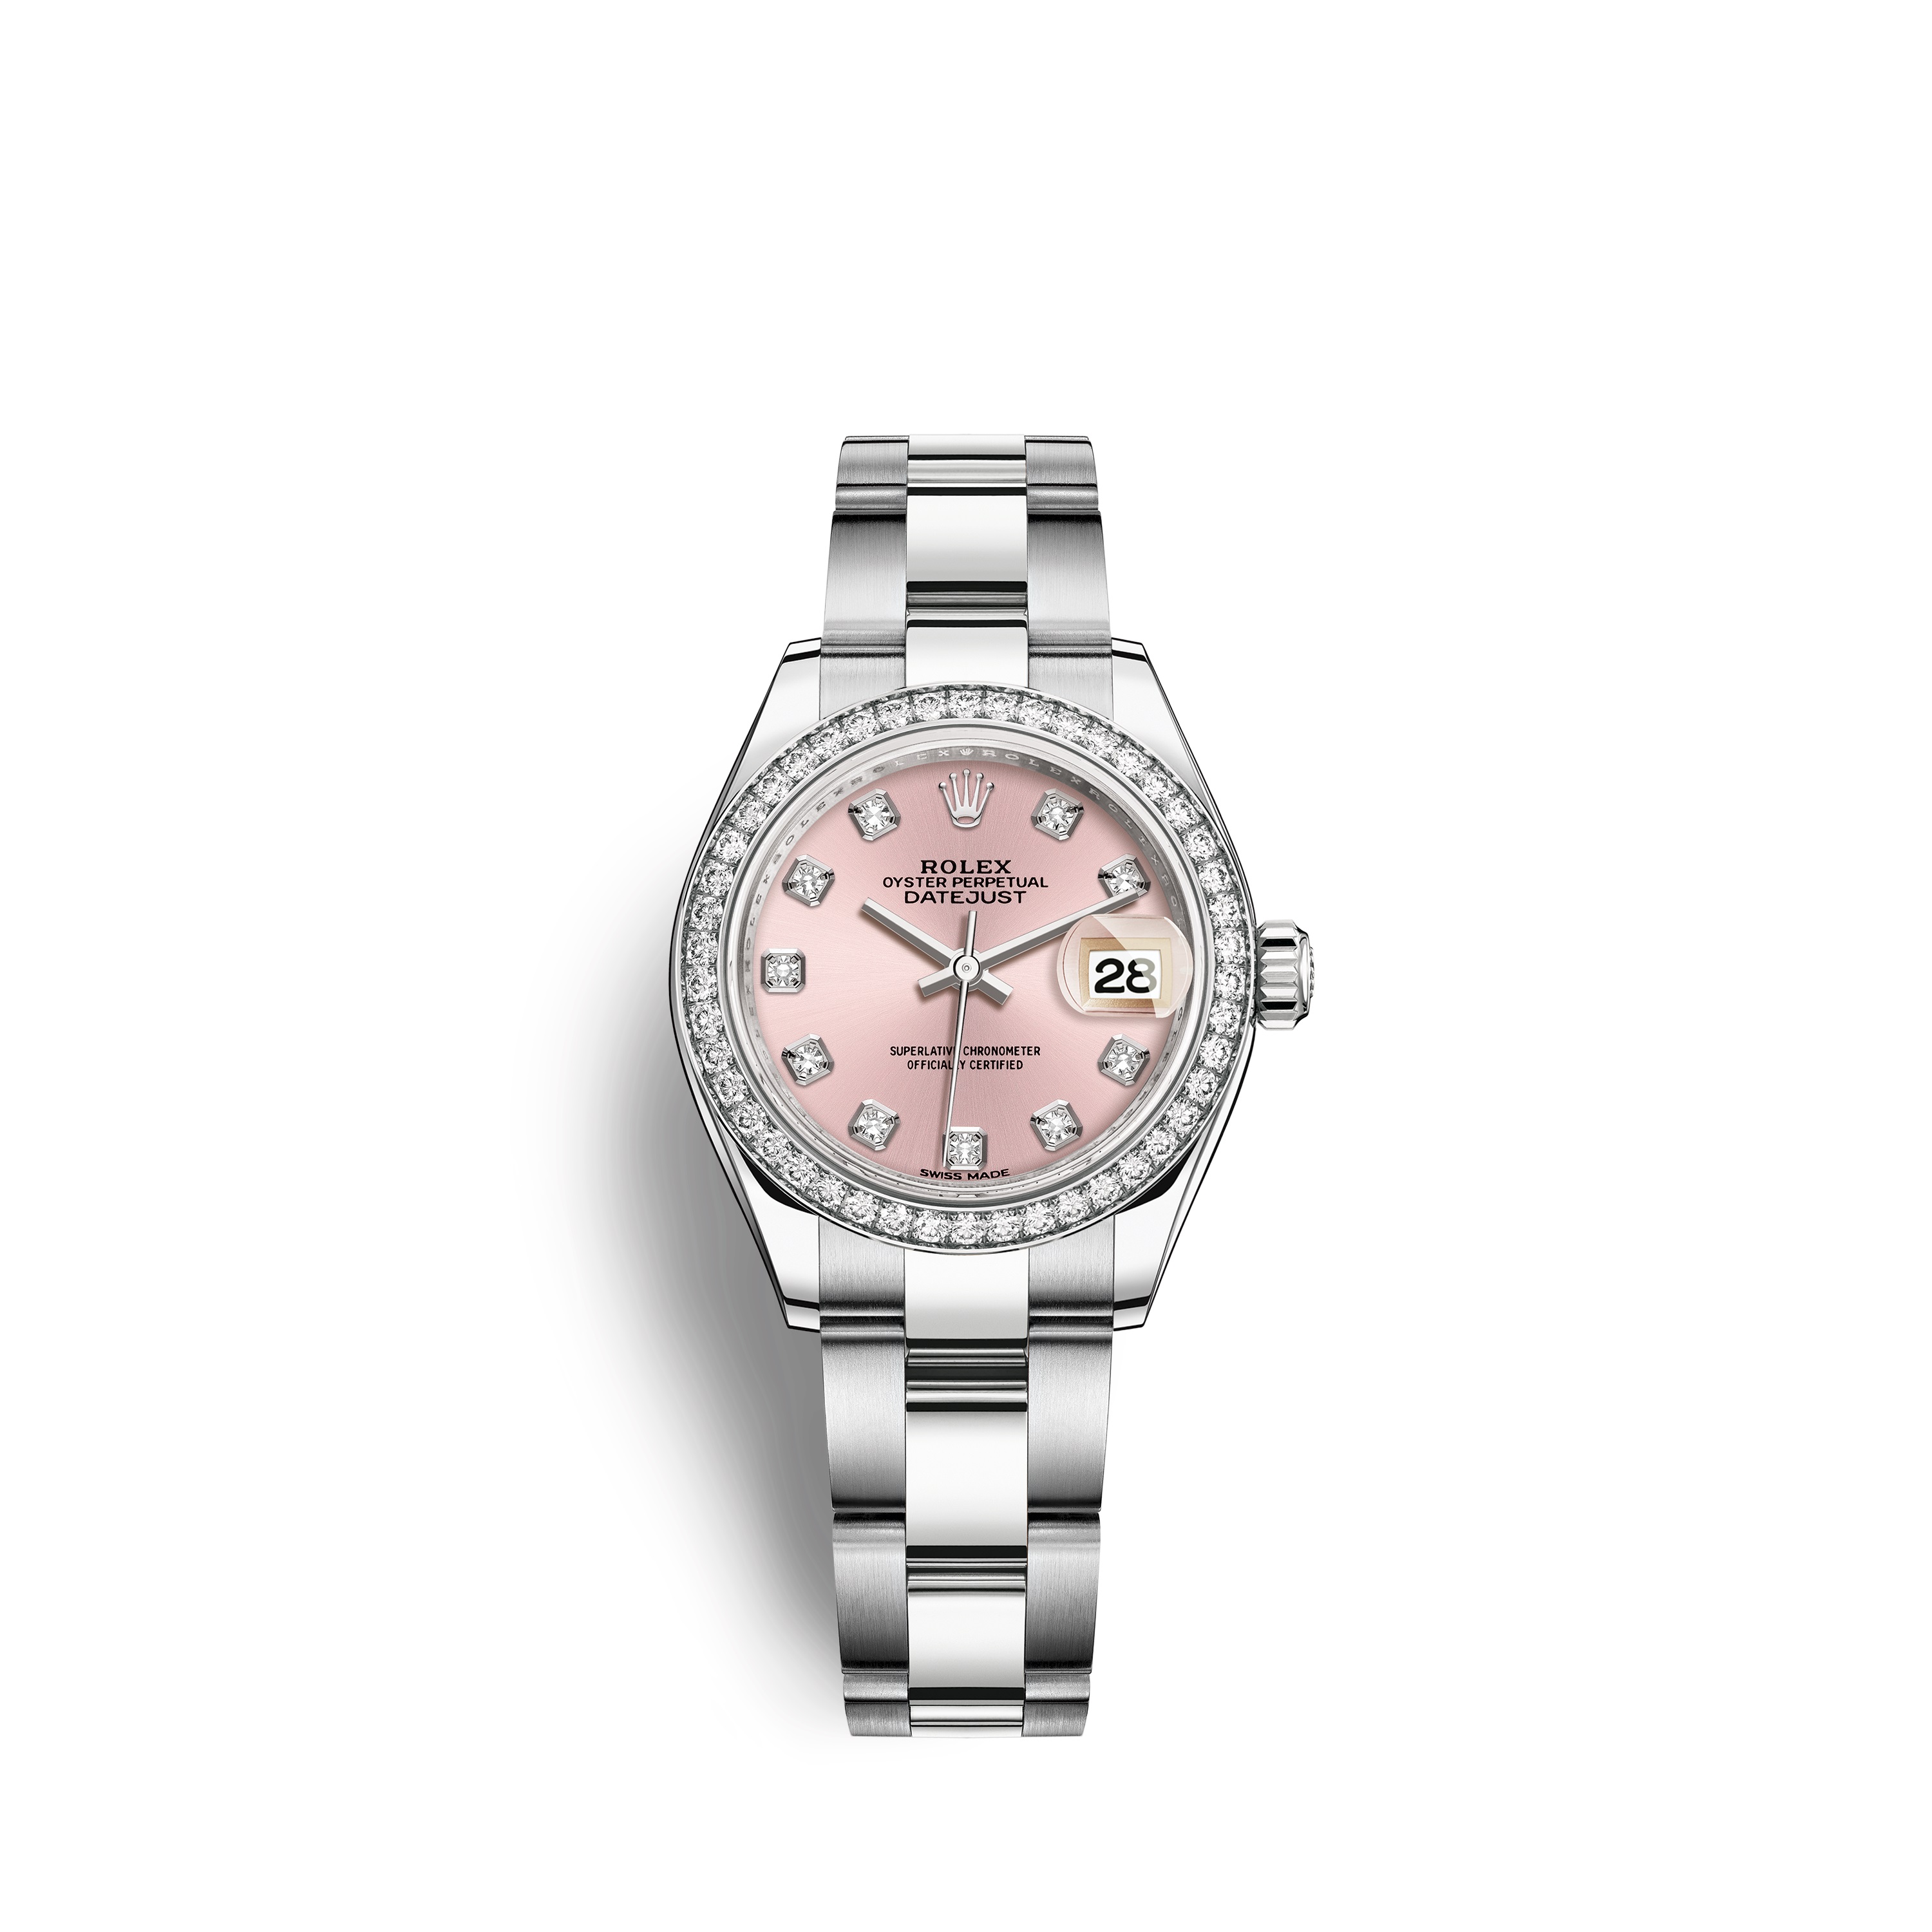 Lady-Datejust 28 279384RBR White Gold & Stainless Steel Watch (Pink Set with Diamonds)